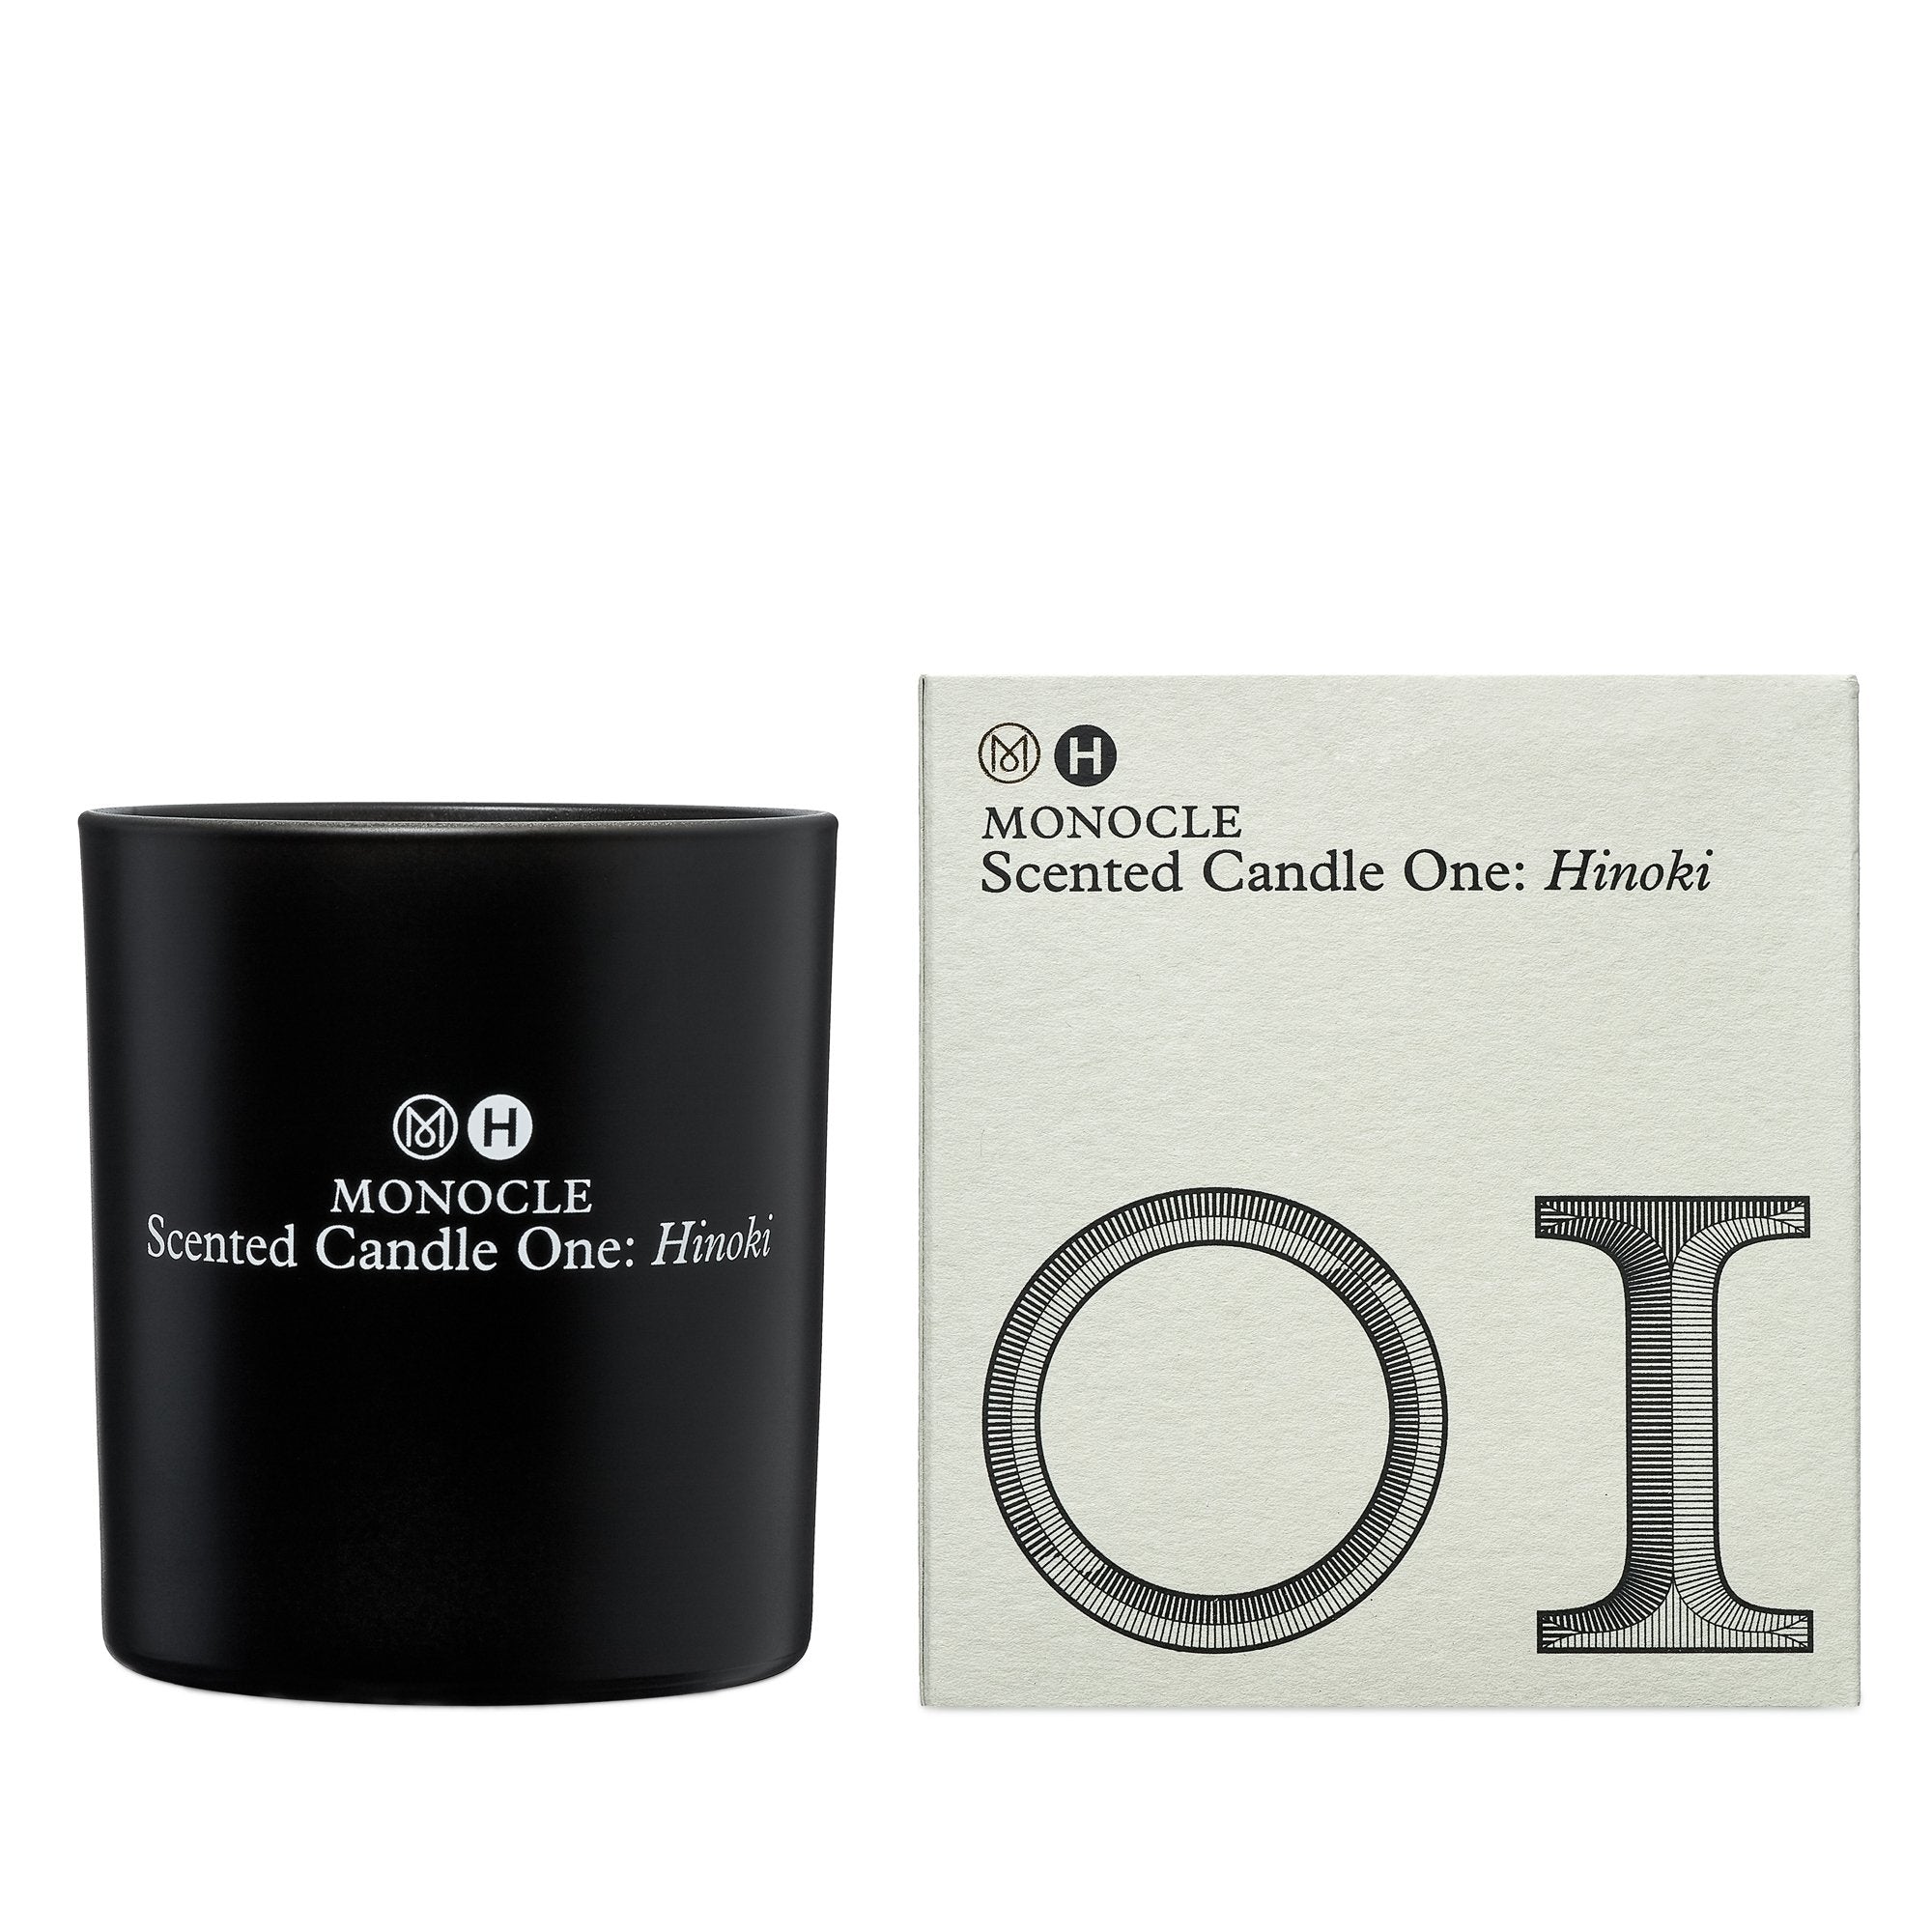 CDG PARFUM - MONOCLE SCENTED CANDLE ONE : HINOKI - (165G) view 1